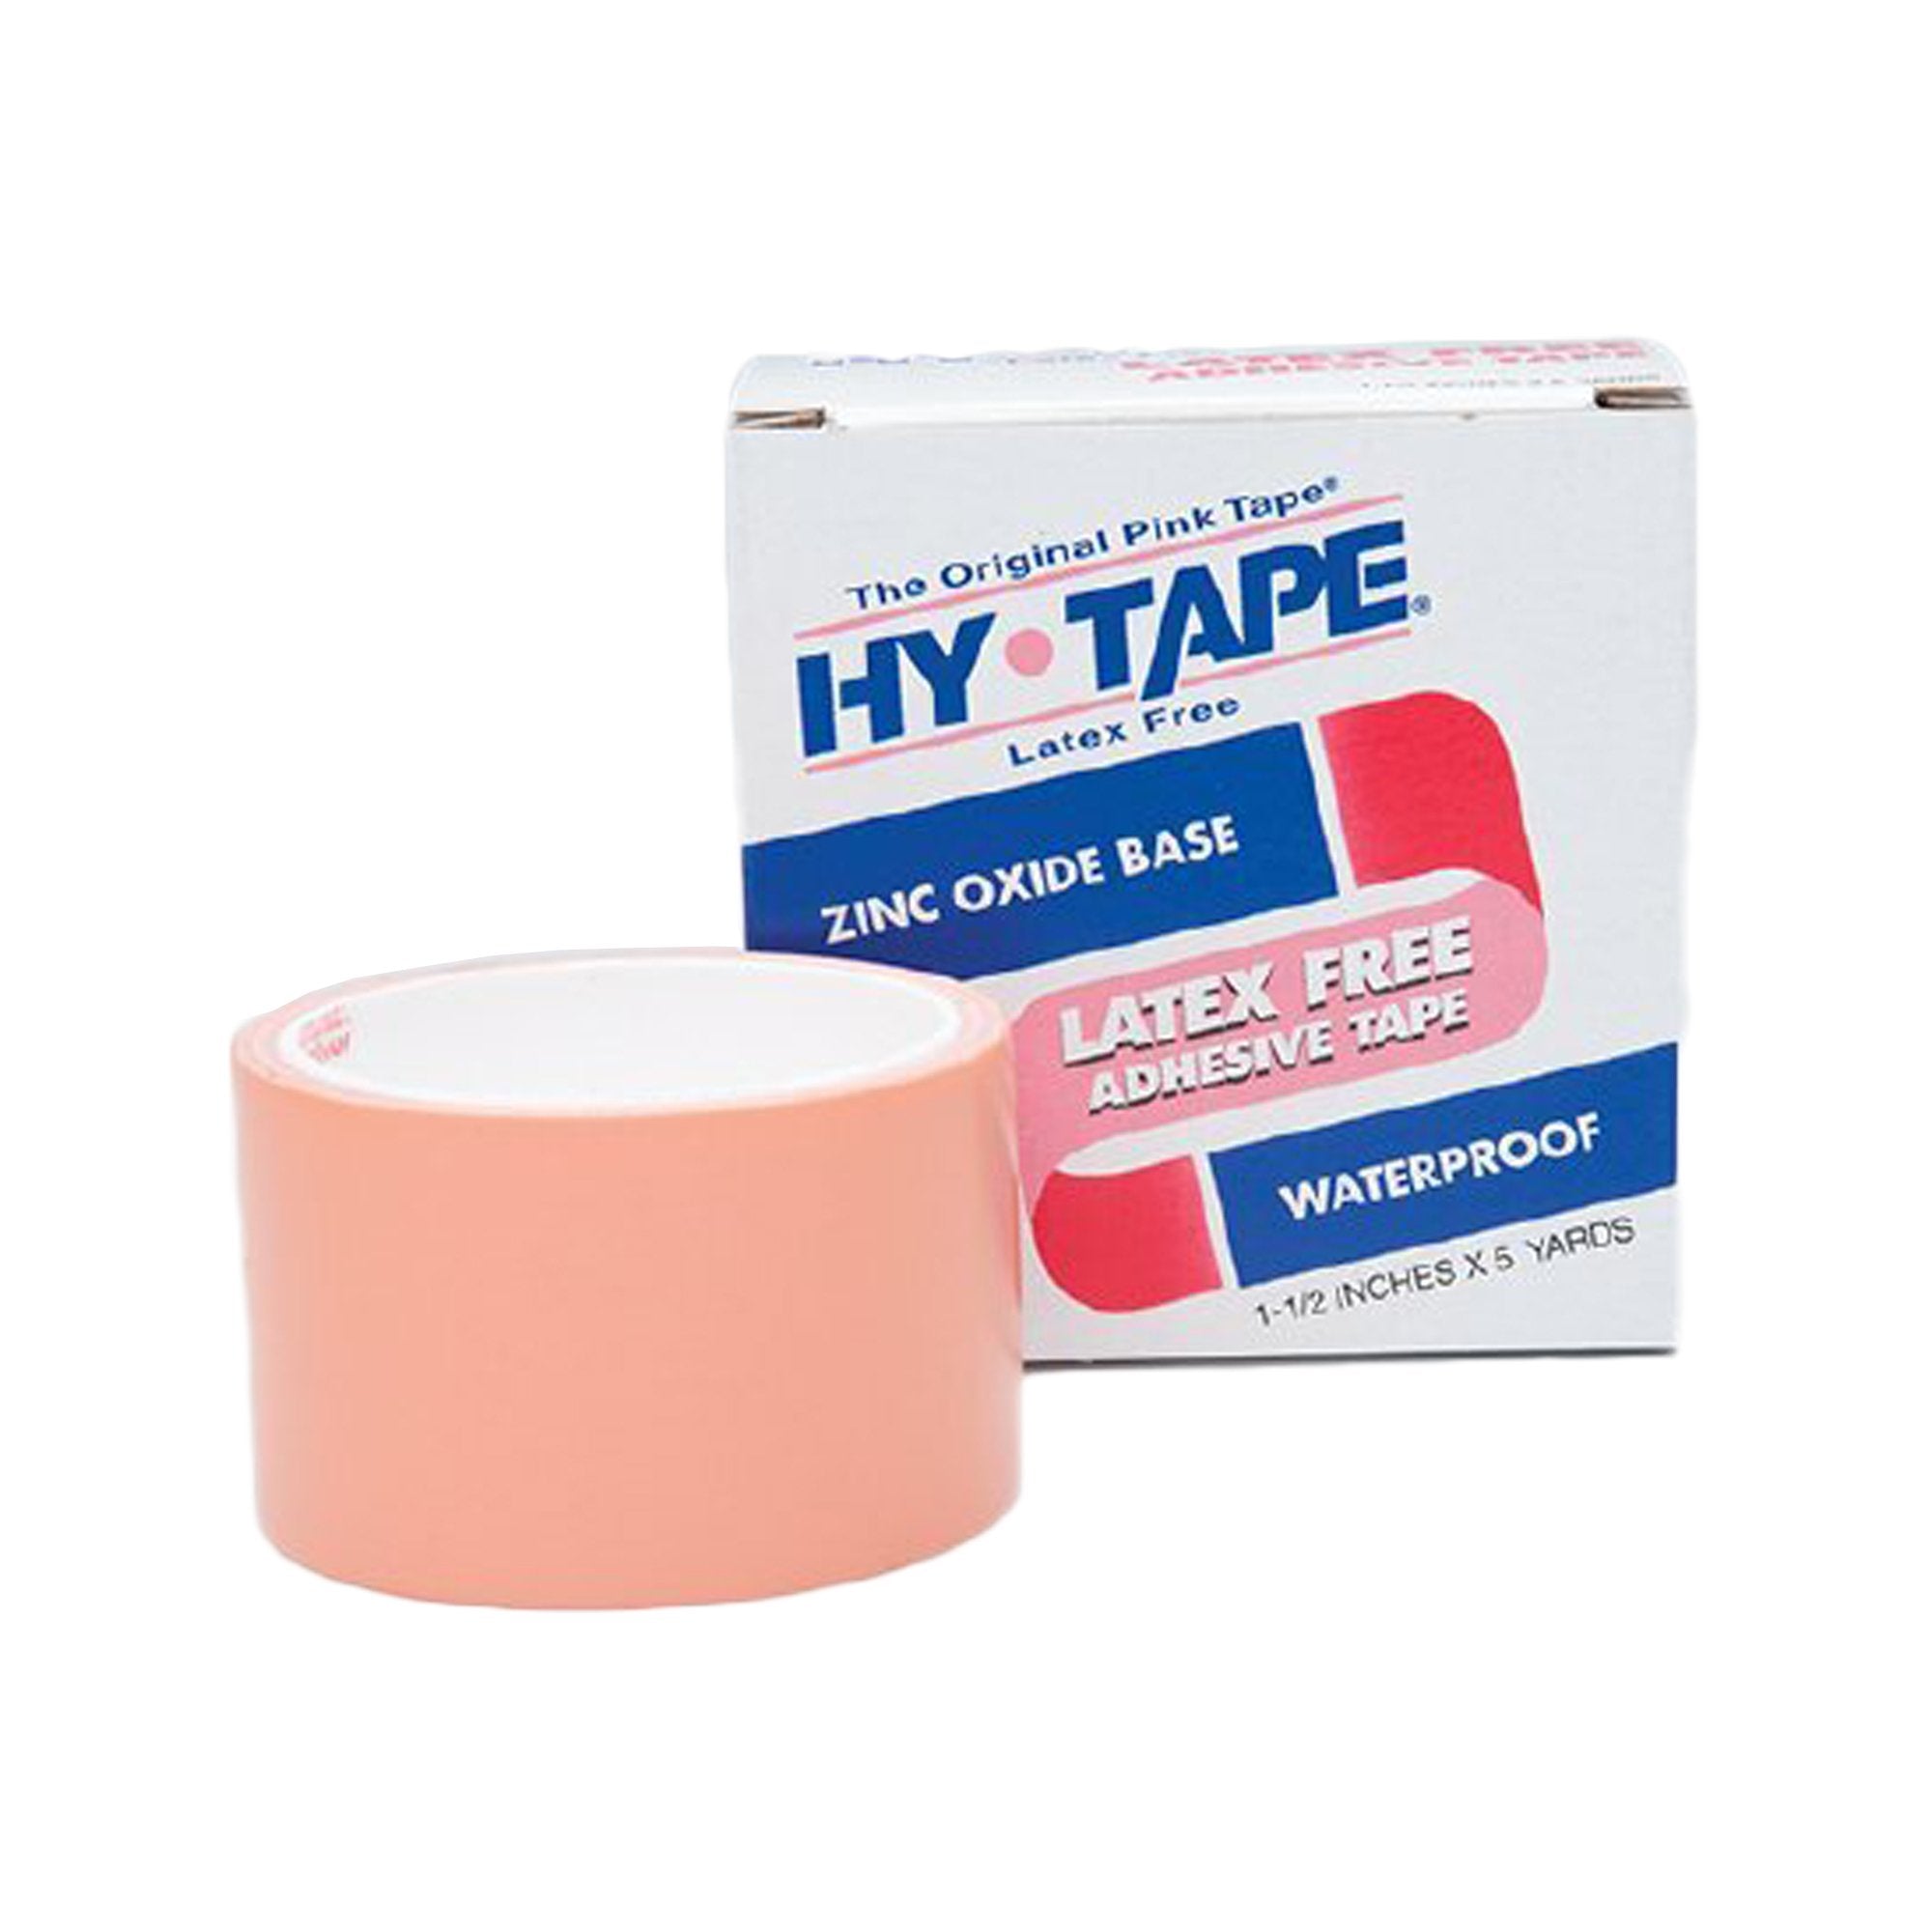 Hy-Tape® Zinc Oxide Adhesive Medical Tape, 2 Inch x 5 Yard, Pink